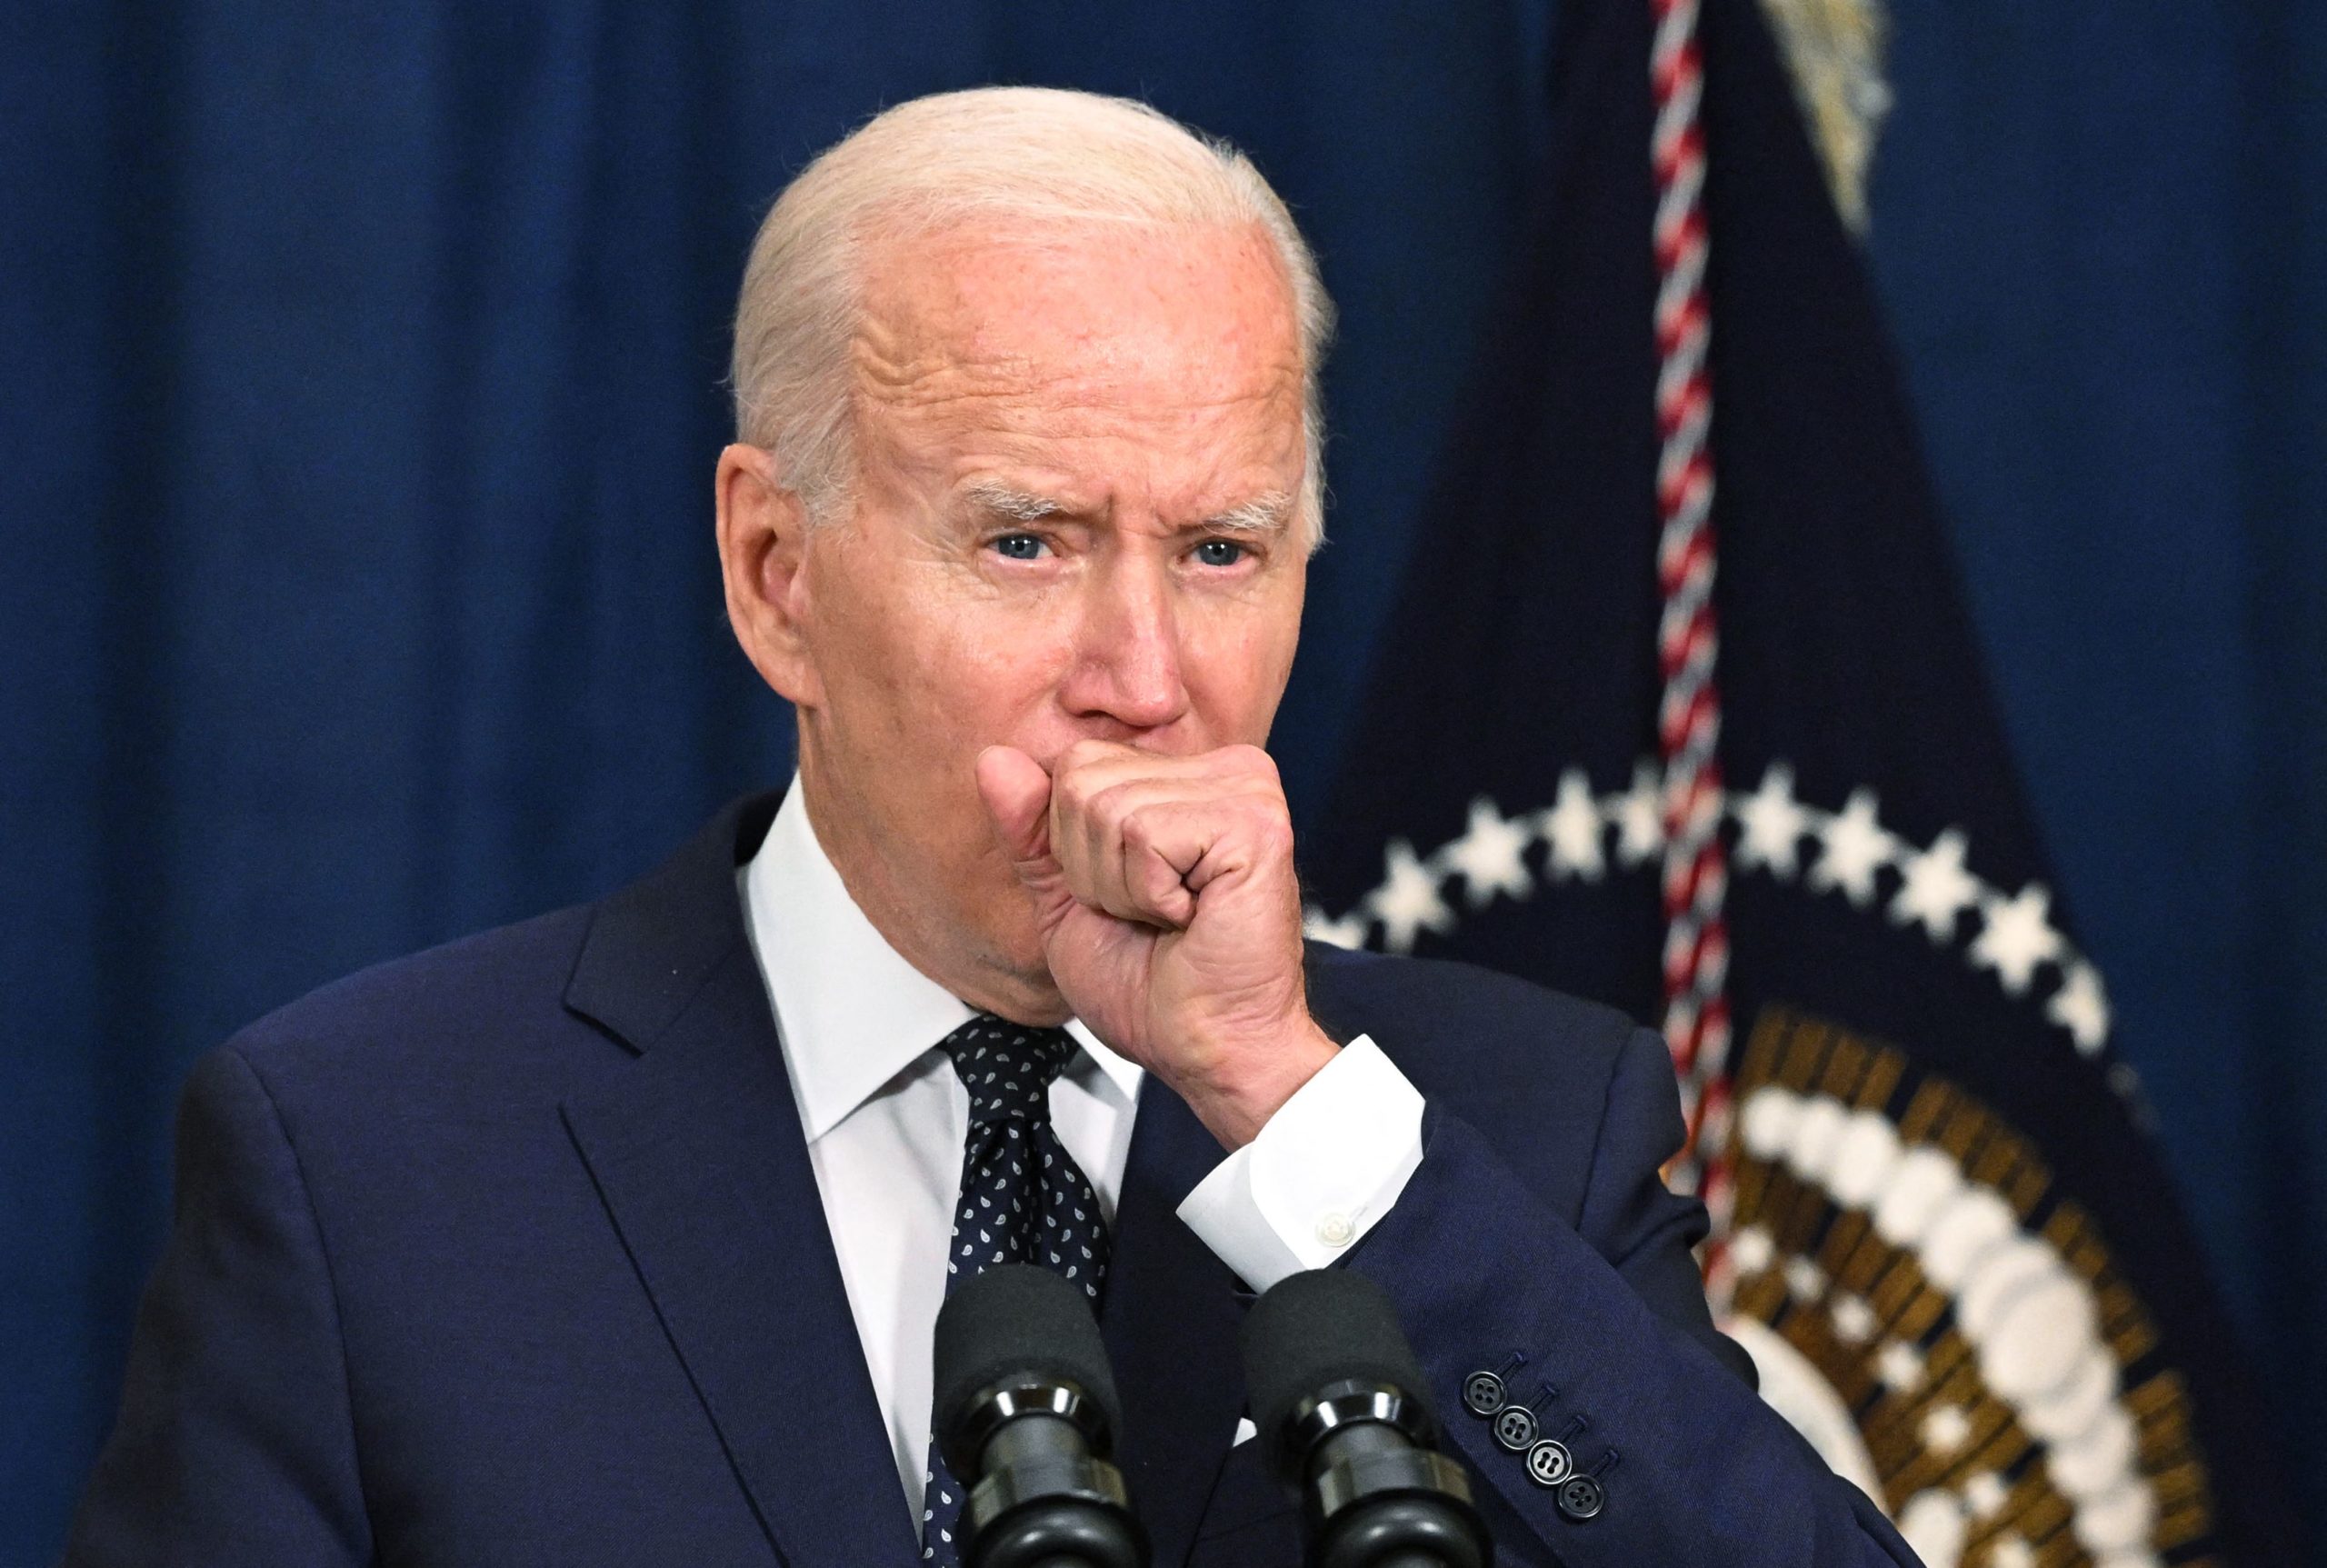 Biden Sounds Noticeably Worse in Virtual Briefing; Hacks and Coughs While Adviser Tries to Speak